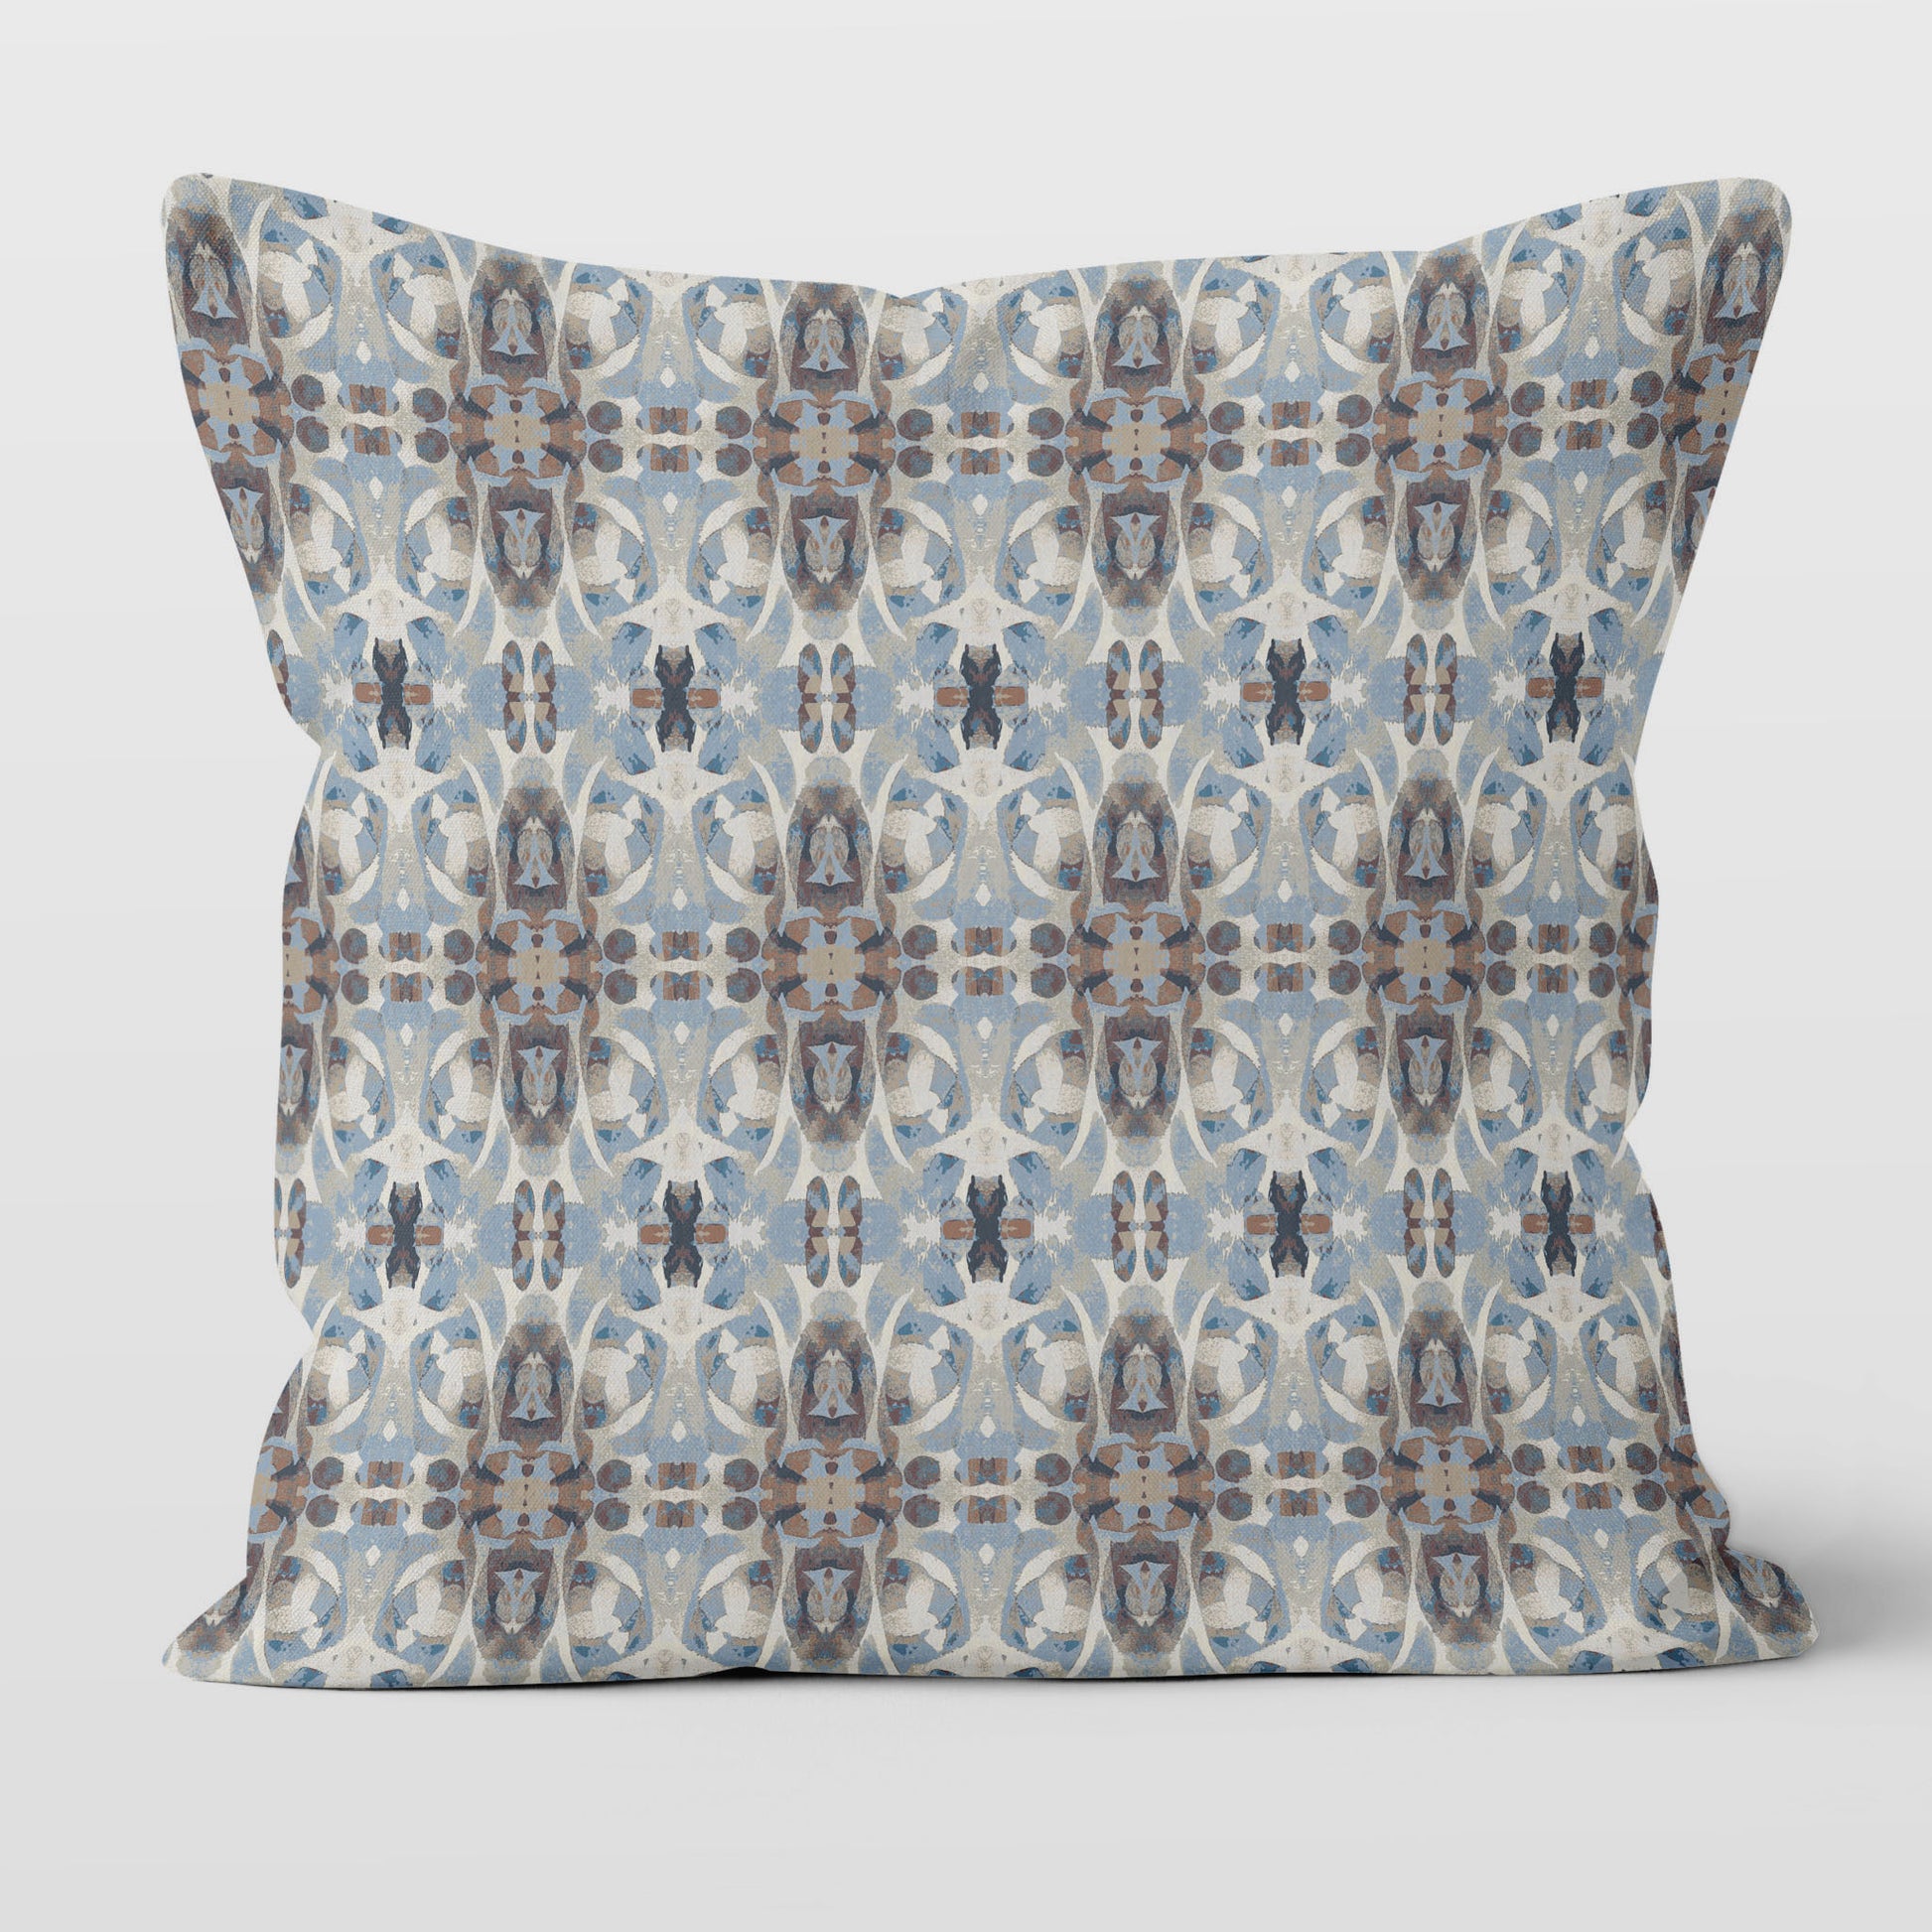 Square throw pillow featuring a blue and brown abstract painted pattern